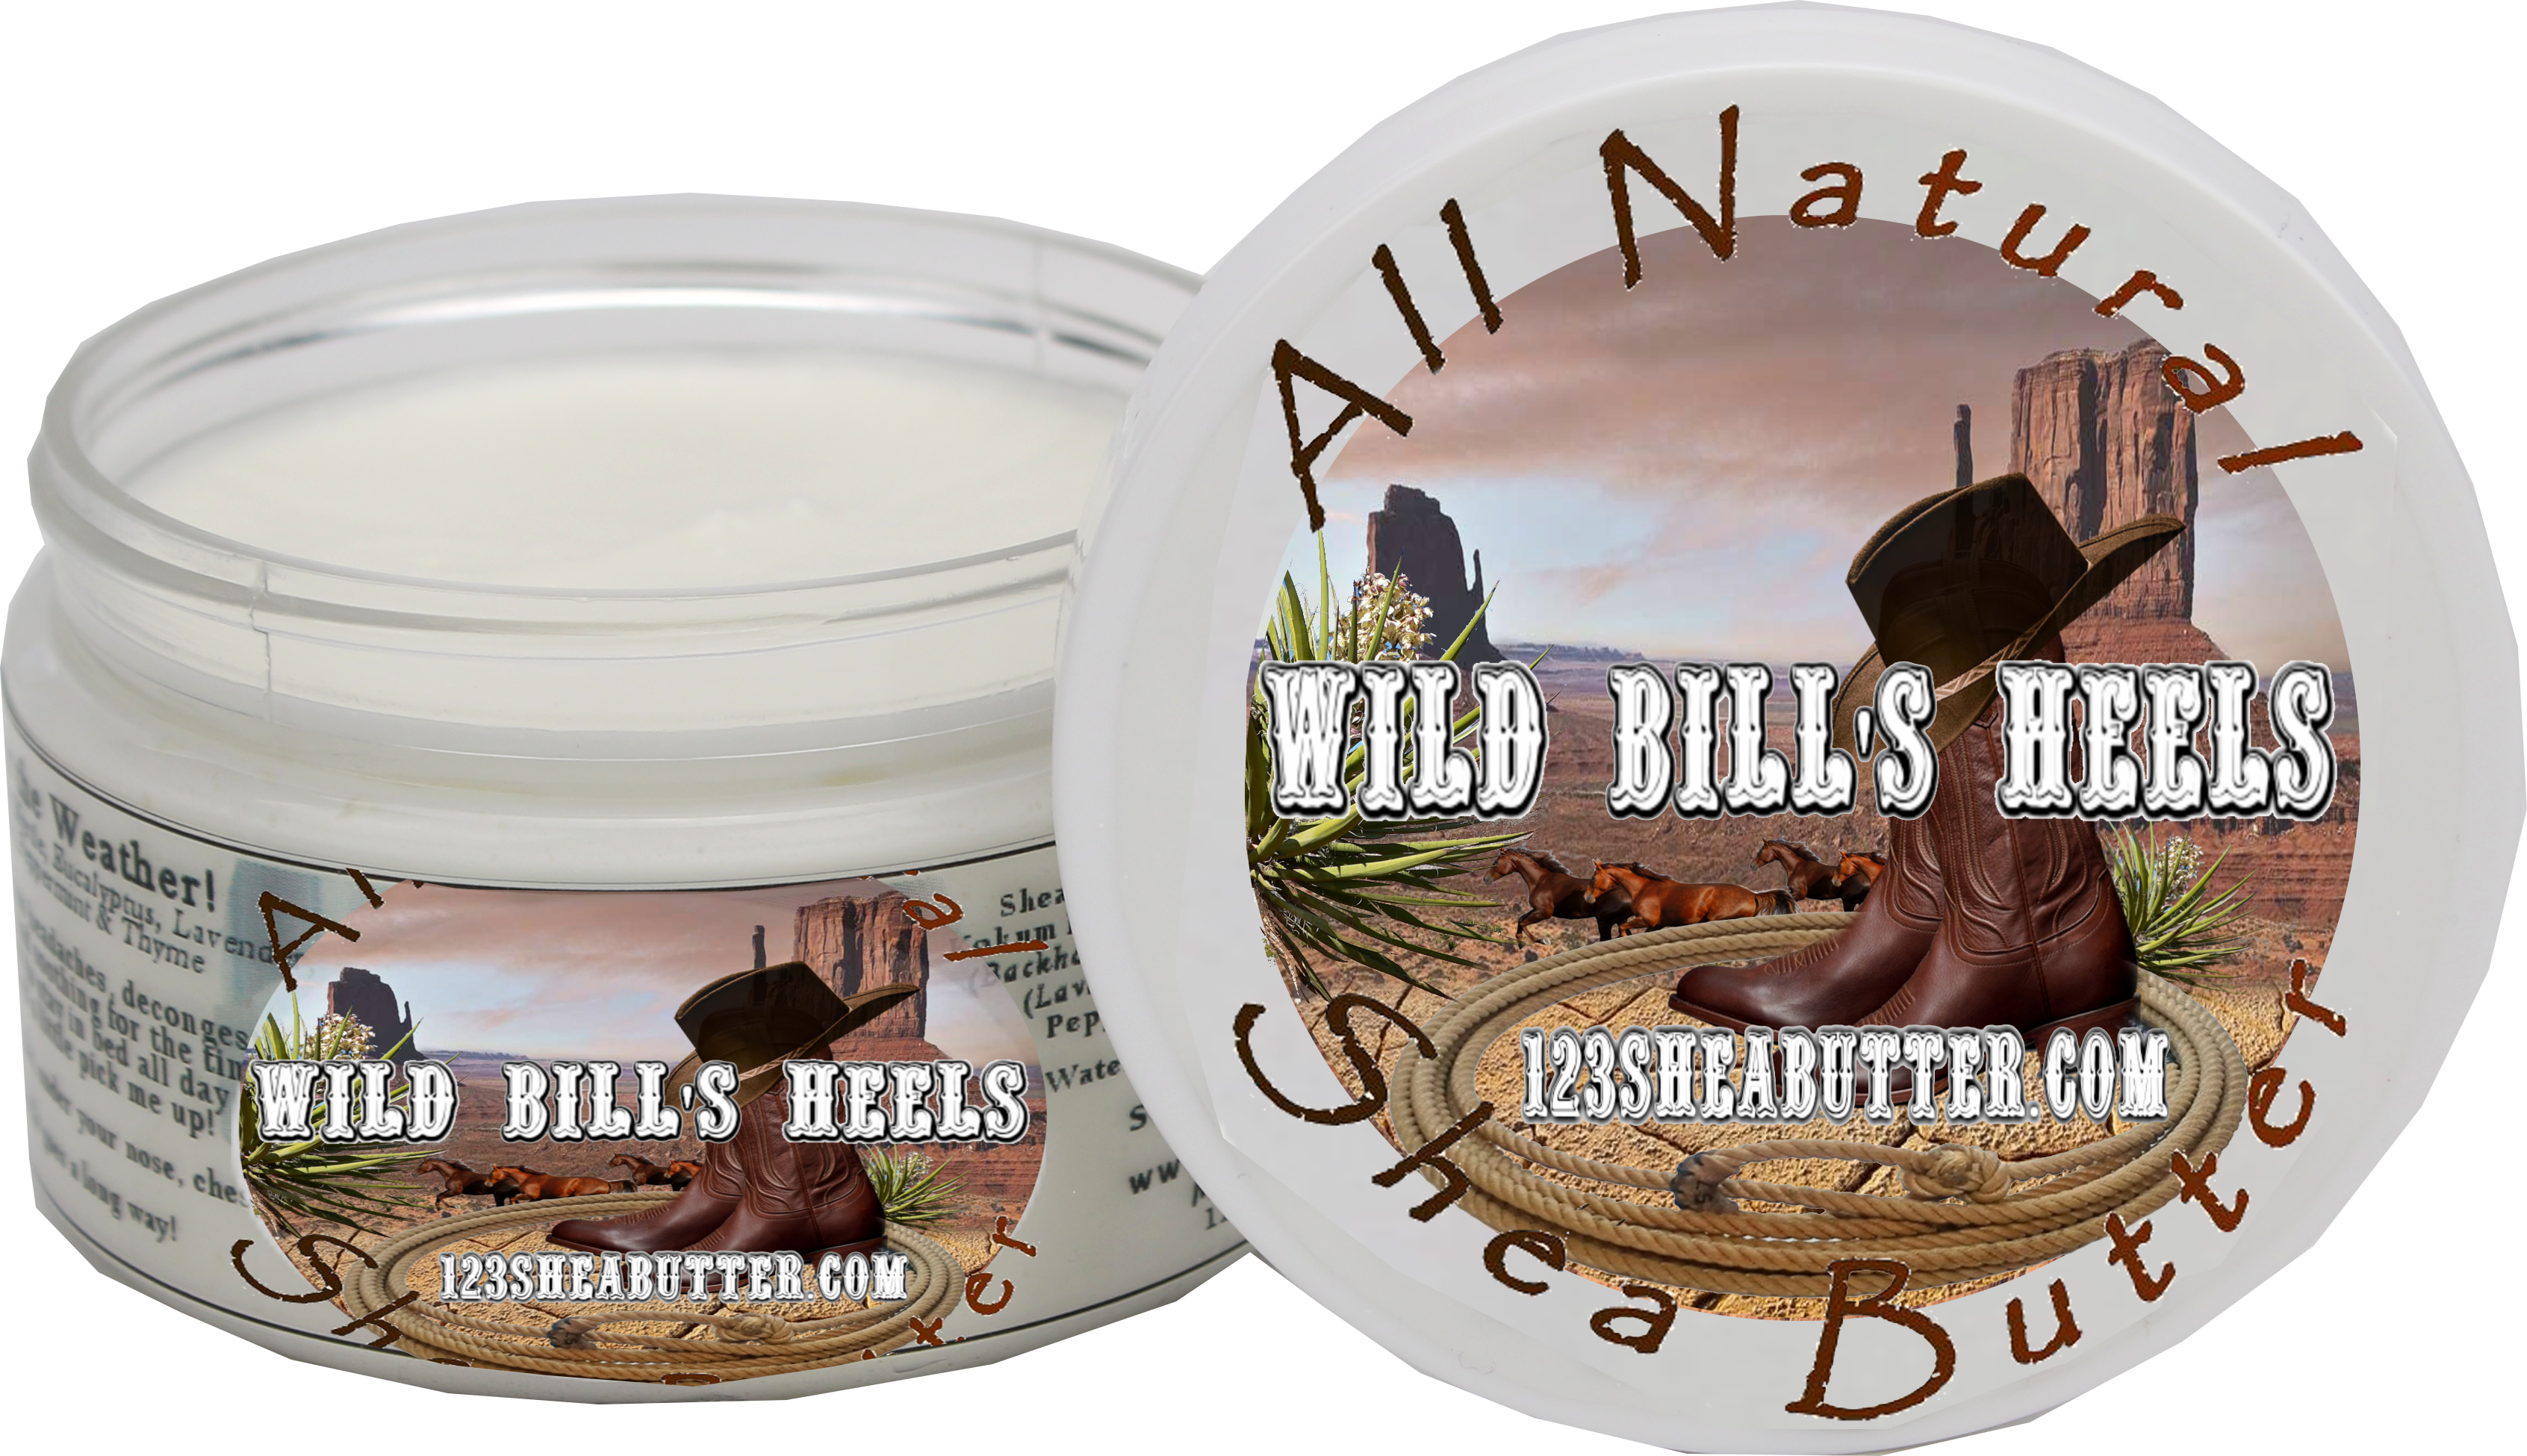 Wild Bill is a healing blend of Frankincense, Helichrysum, Cypress, Siberian Fir, Copaiba, Arborvitae and Vetiver all very high quality and therapeutic grade essential oils.